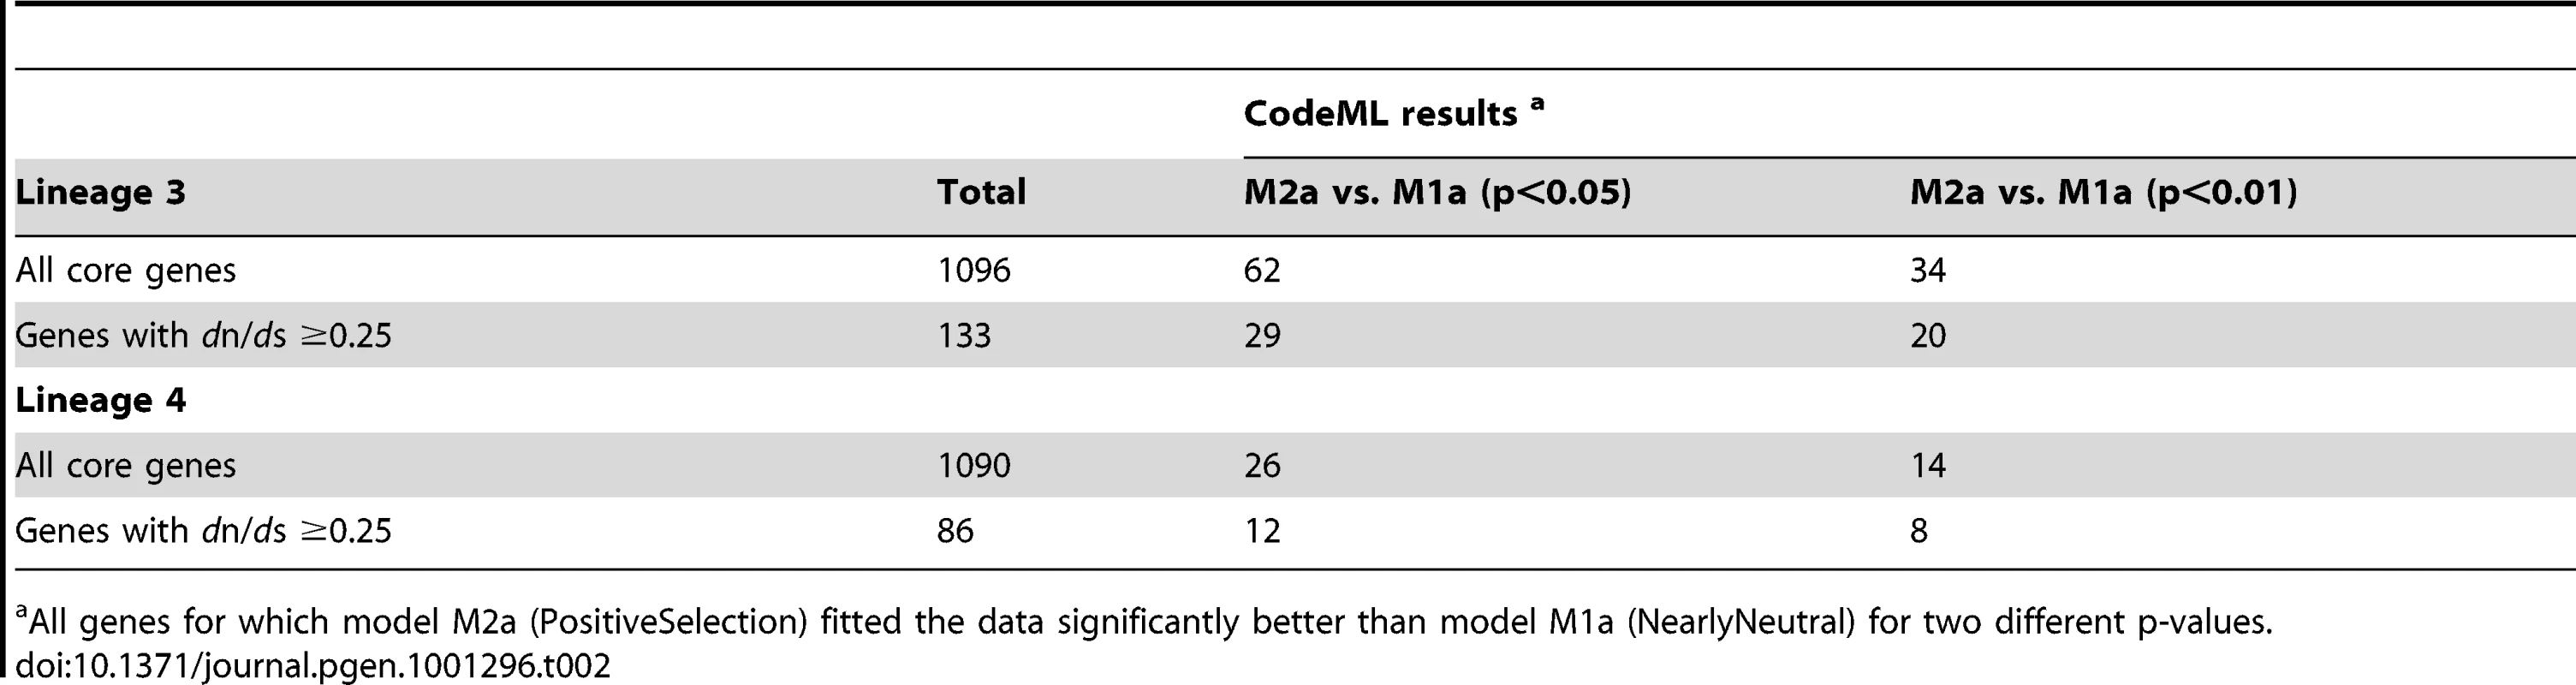 Number of genes revealing significant positive selection in the CodeML analysis for lineage 3 and lineage 4.